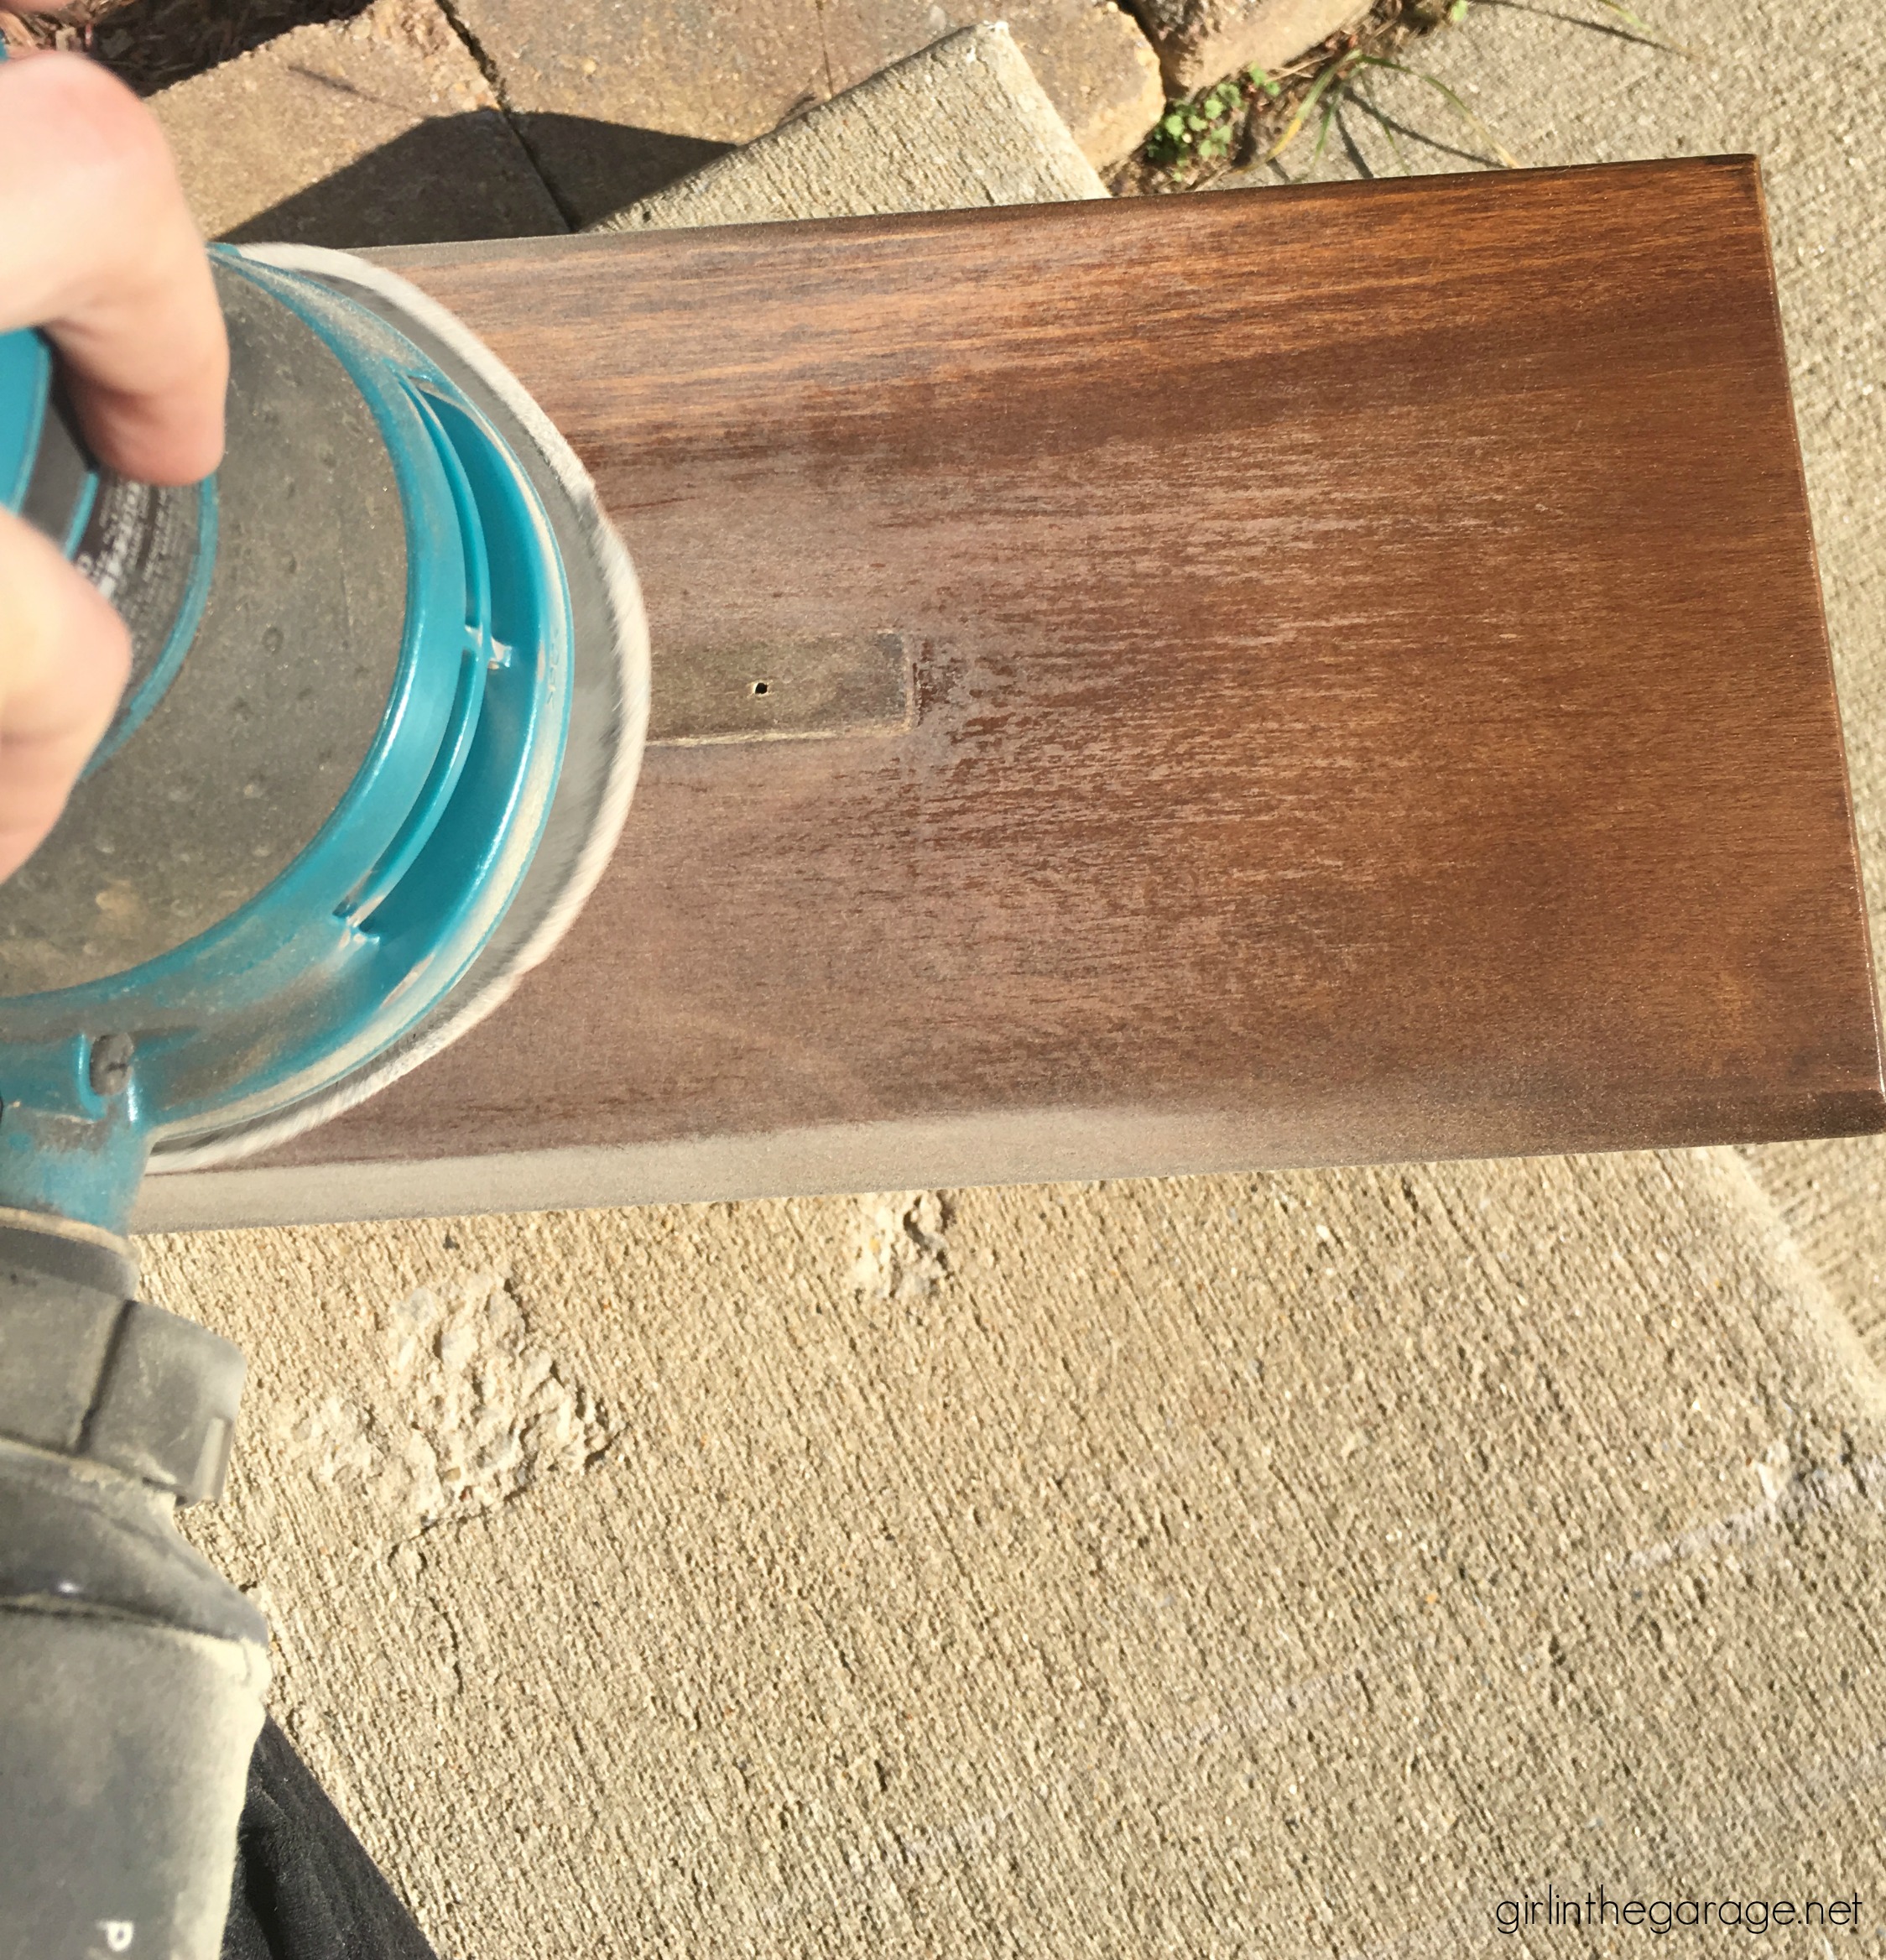 Learn how to refinish a dresser with Minwax products including Vintage Blue, the 2021 Color of the Year. Add faux-aged copper pulls and map paper lined drawers for the finishing touch. #ad DIY makeover ideas by Girl in the Garage